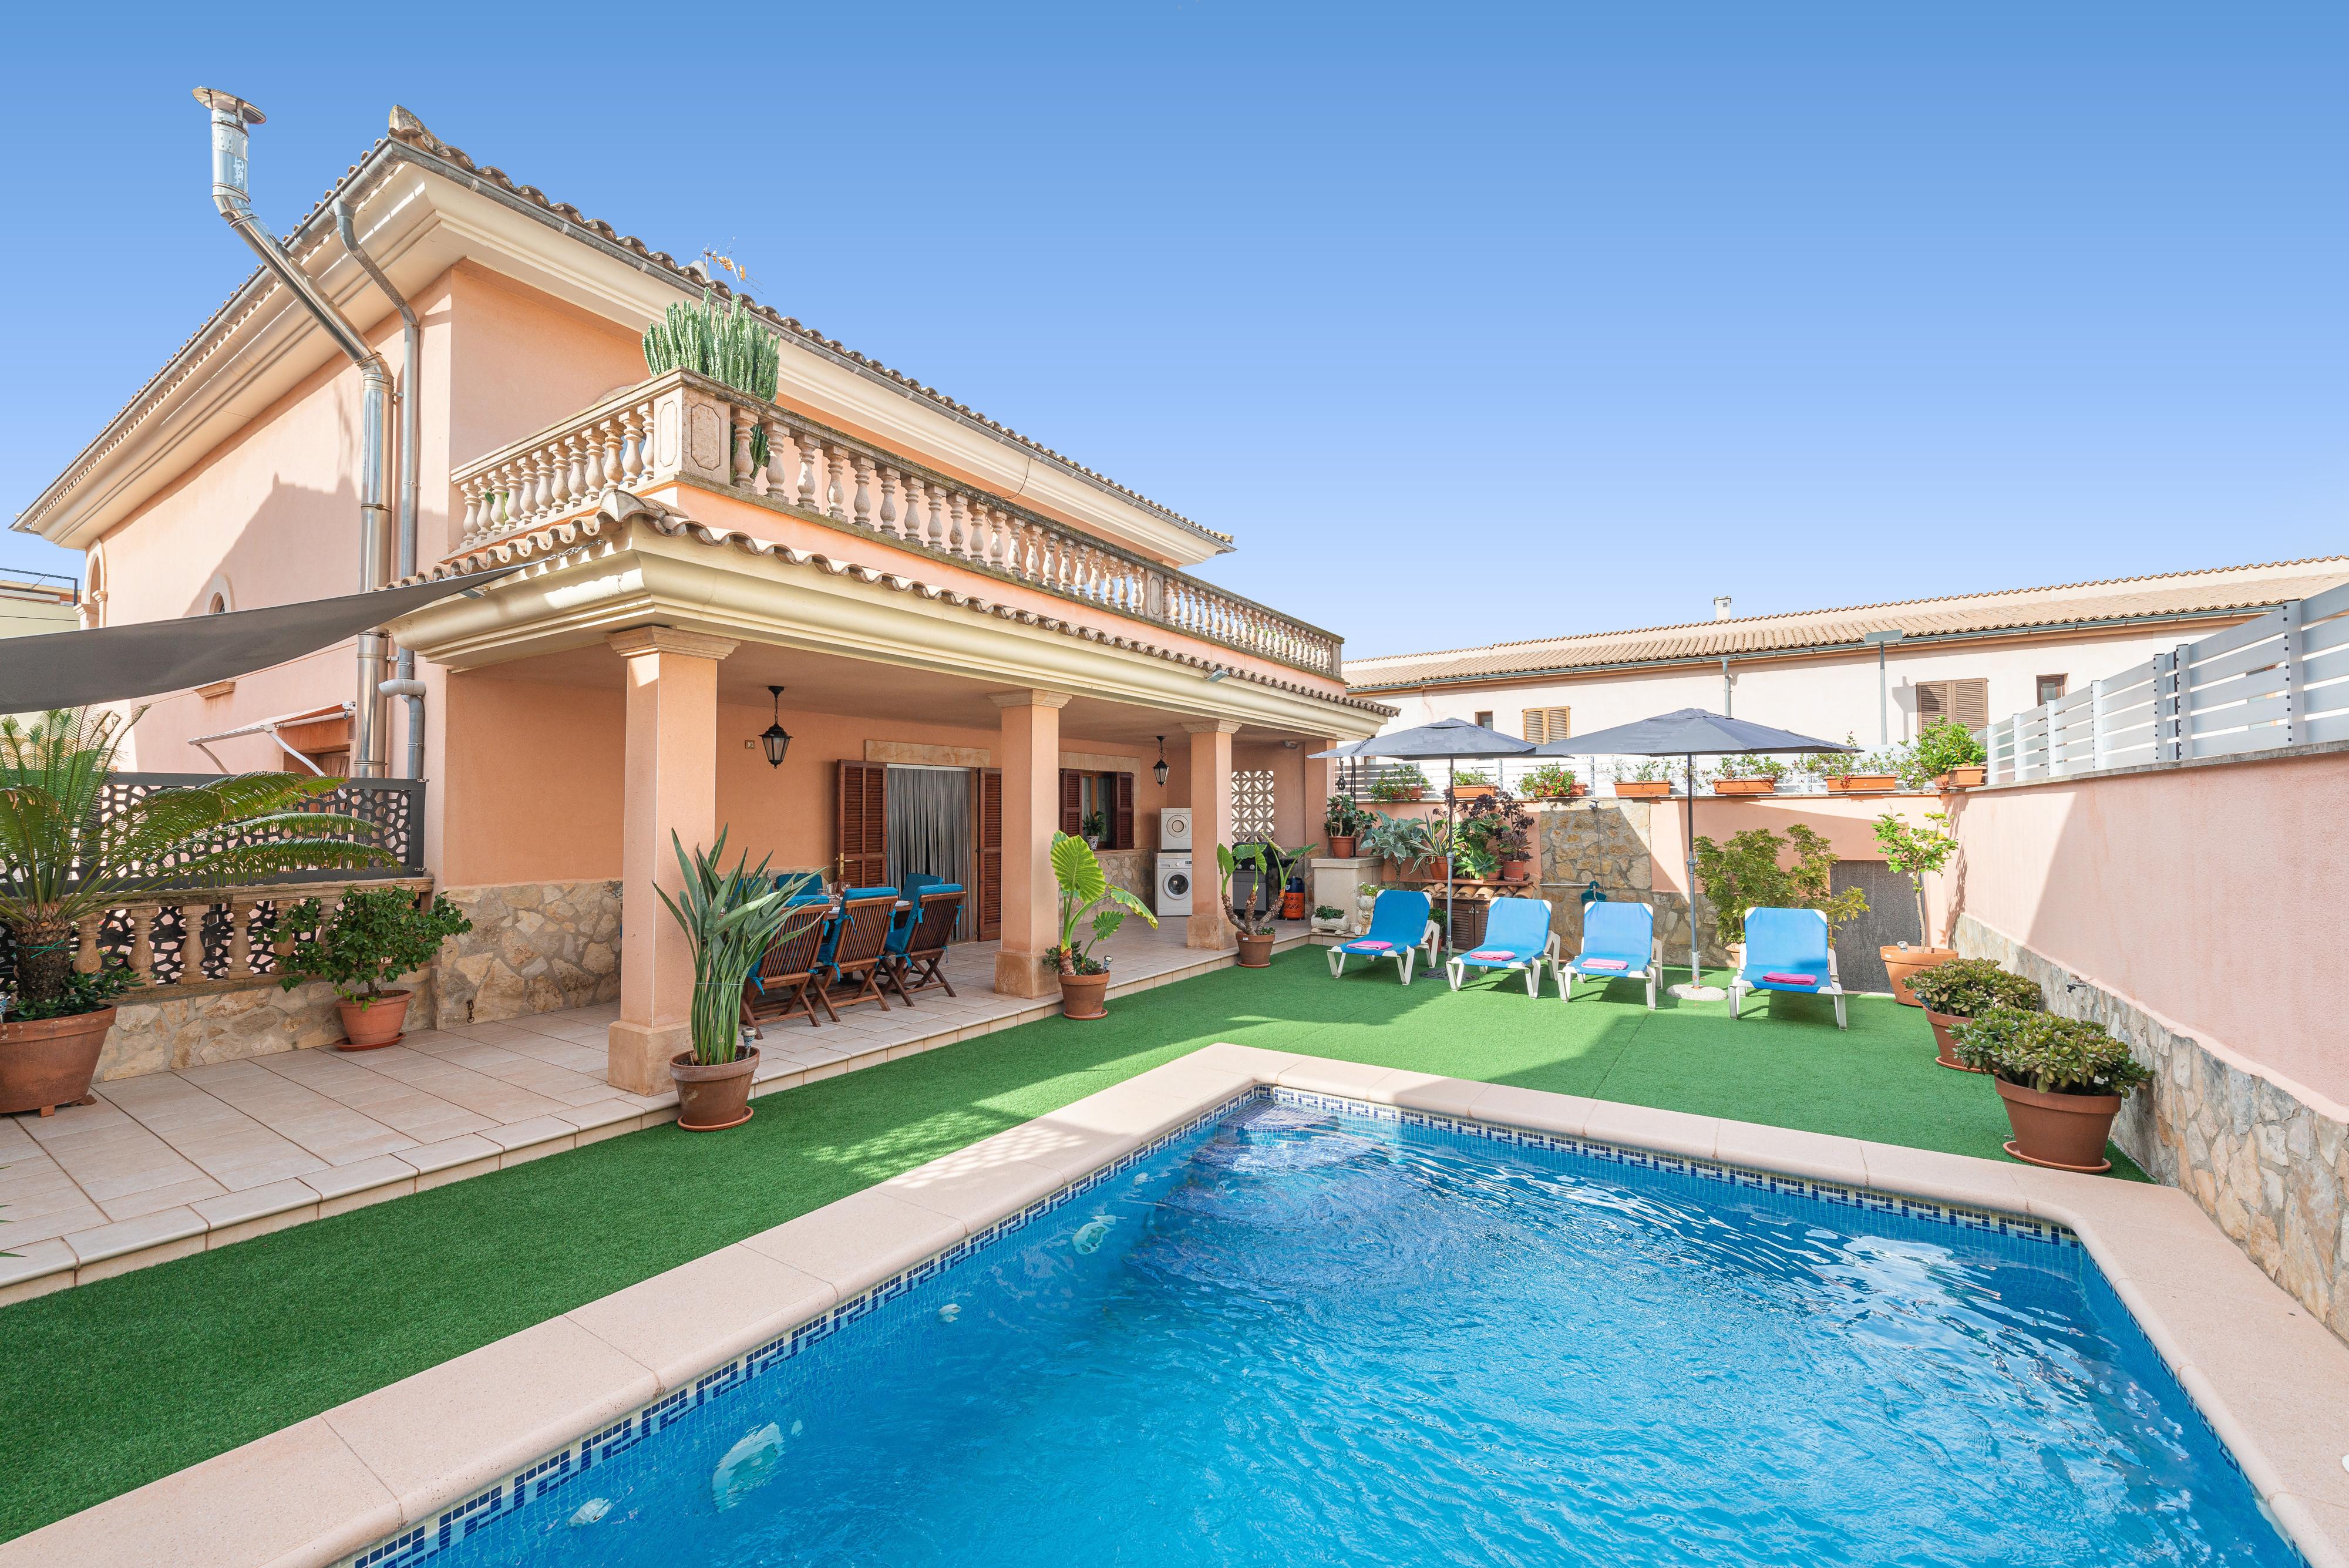 Property Image 2 - CAS BARBER - Villa with private pool in MURO. Free WiFi